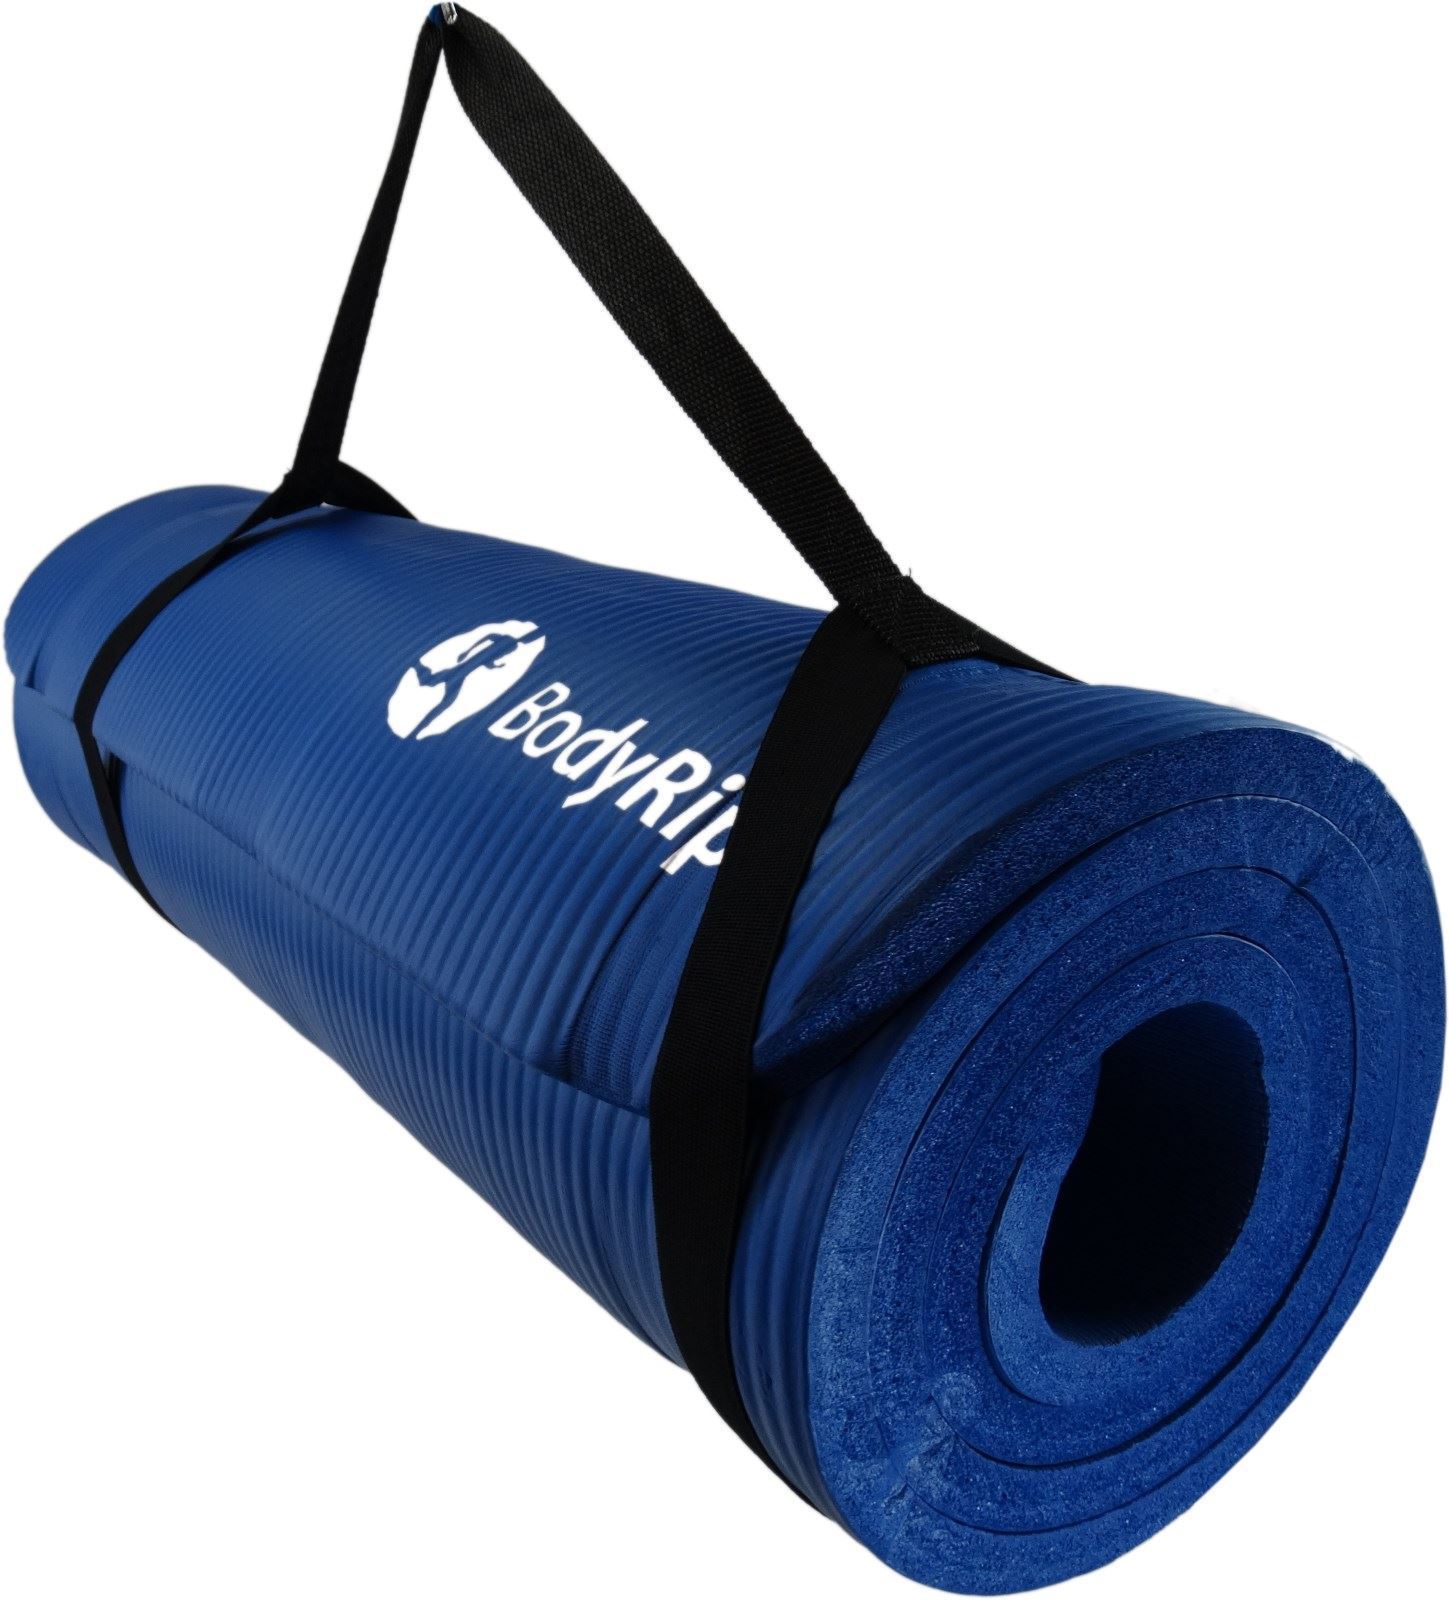 BodyRip Exercise Training Nbr Blue Yoga Mat 15Mm With Carry Straps Workout eBay